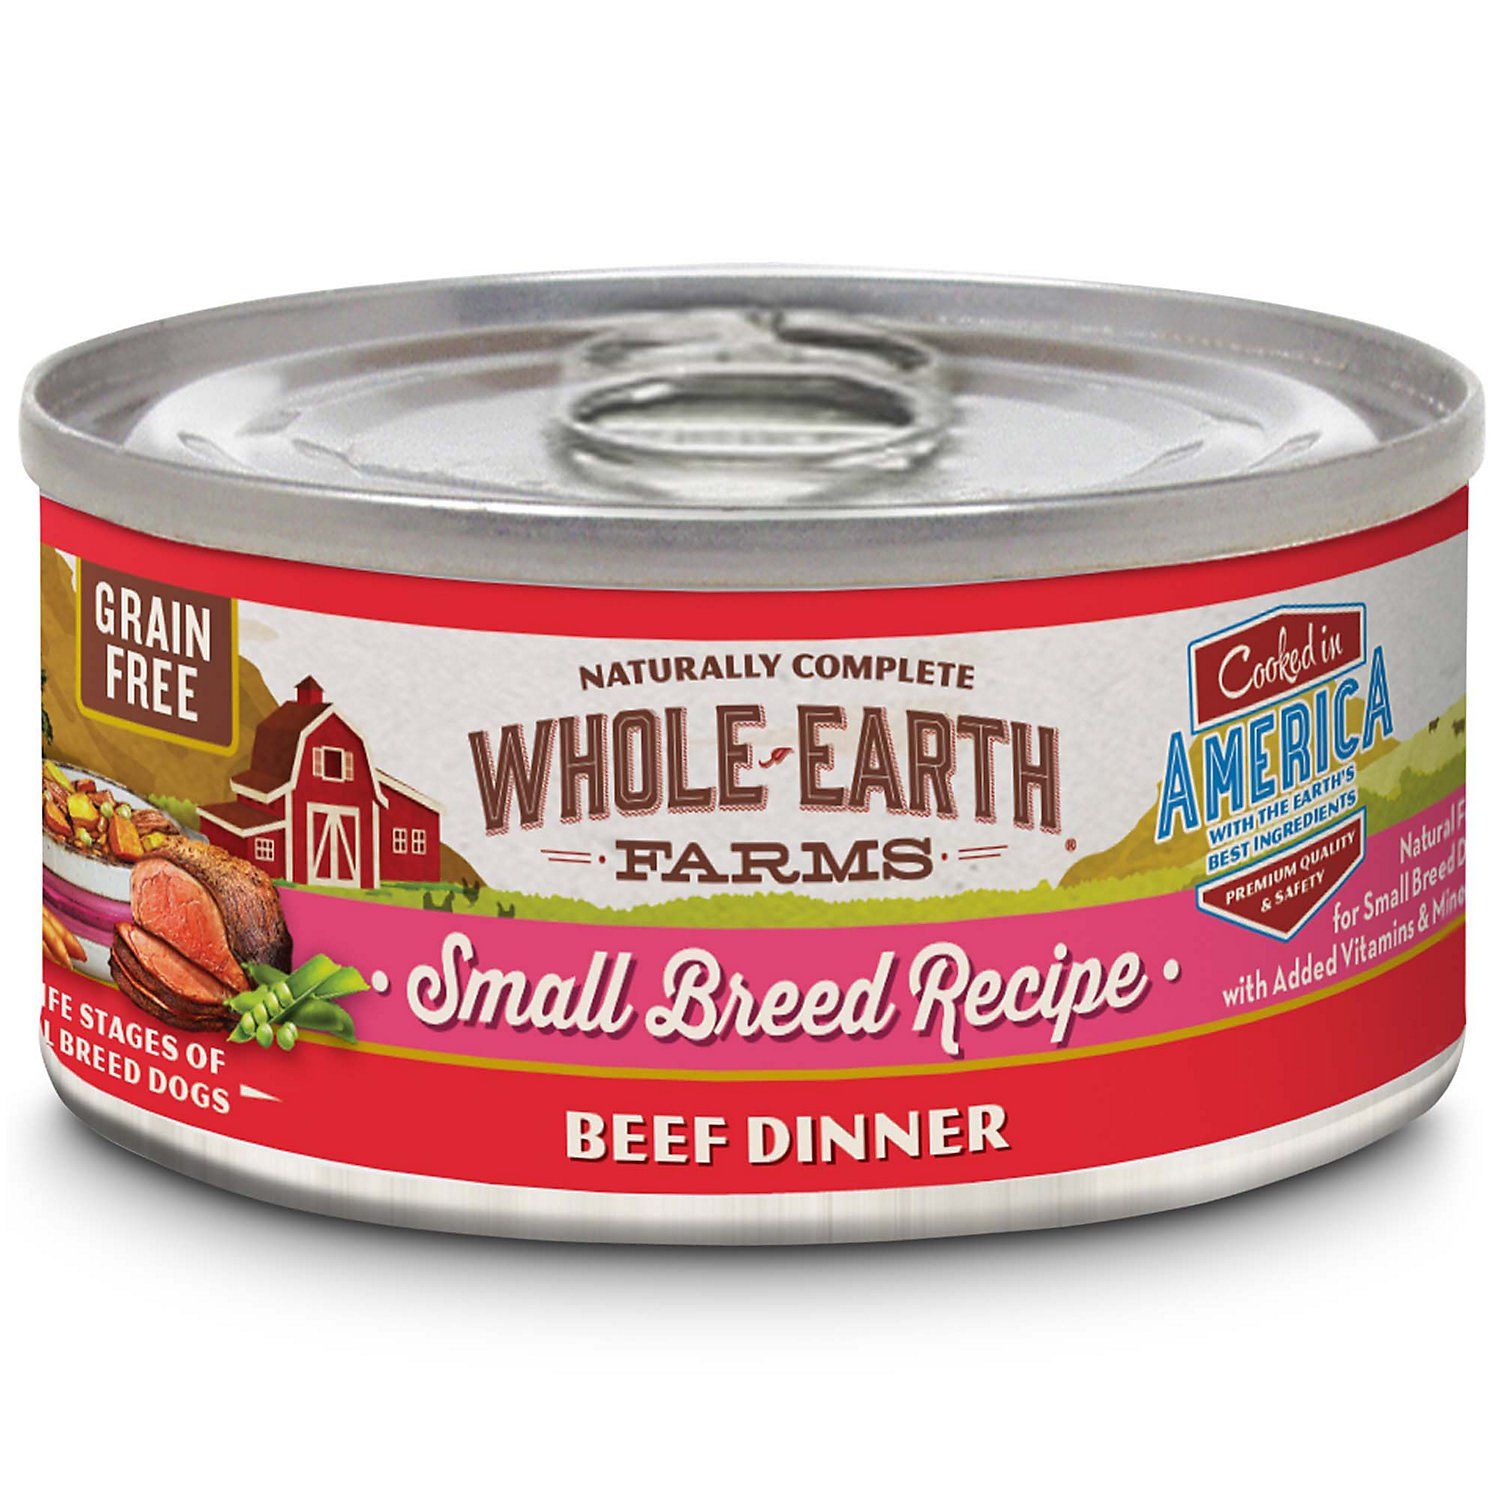 Whole Earth Farms Grain Free Small Breed Beef Dinner Canned Dog Food - 3 oz Cans - Case of 24  